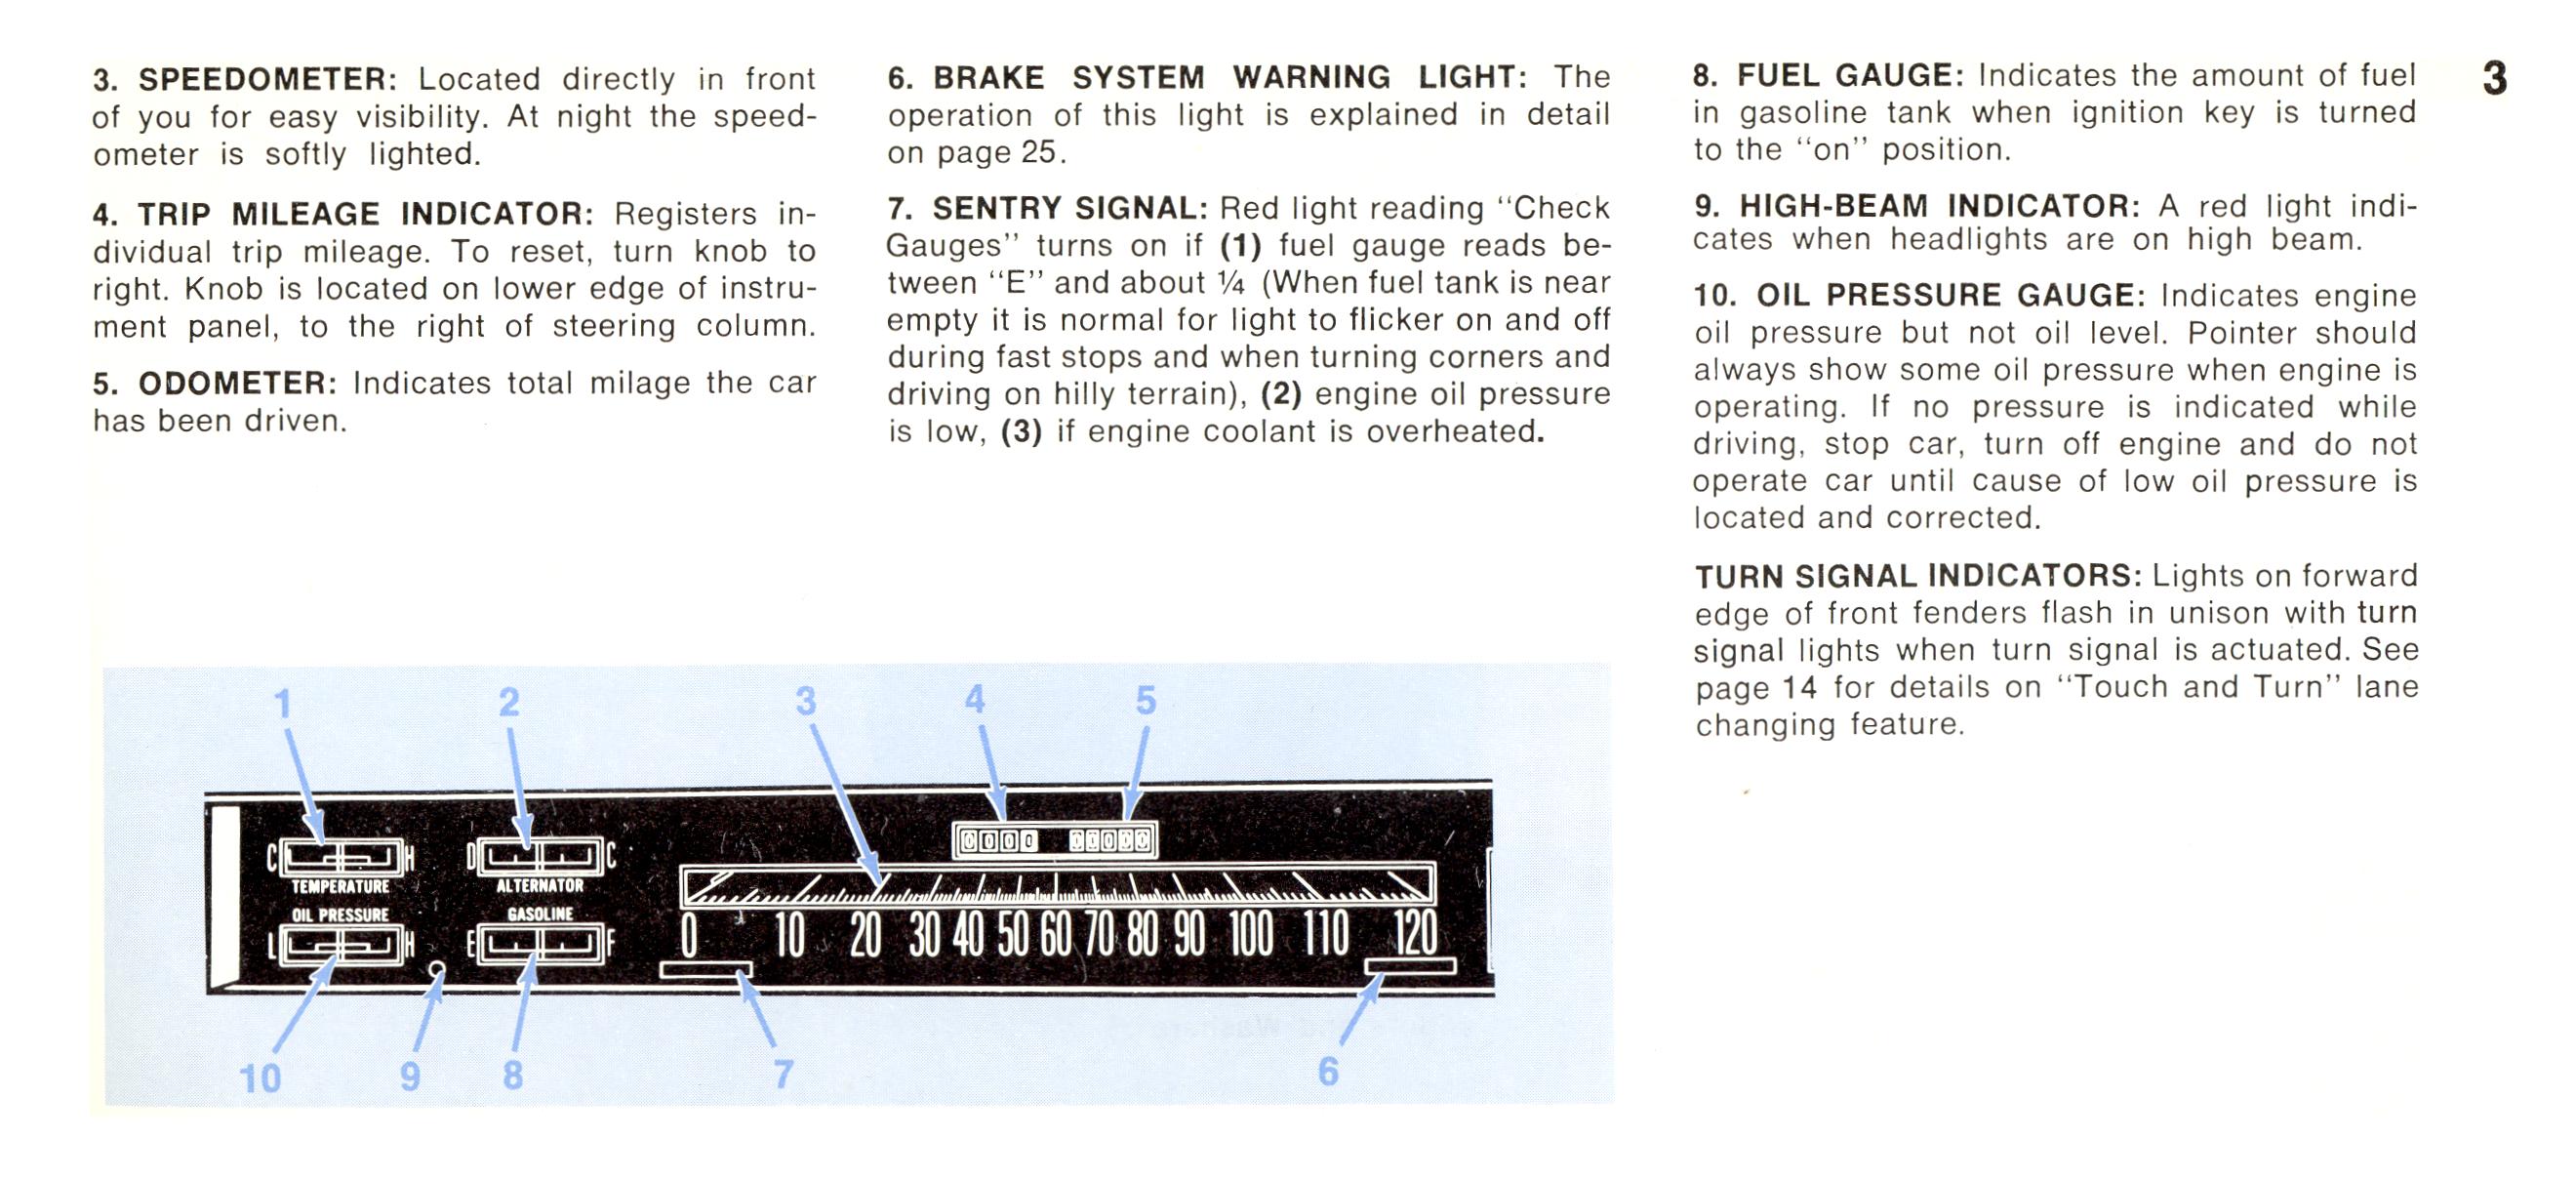 1968 Chrysler Imperial Owners Manual Page 35